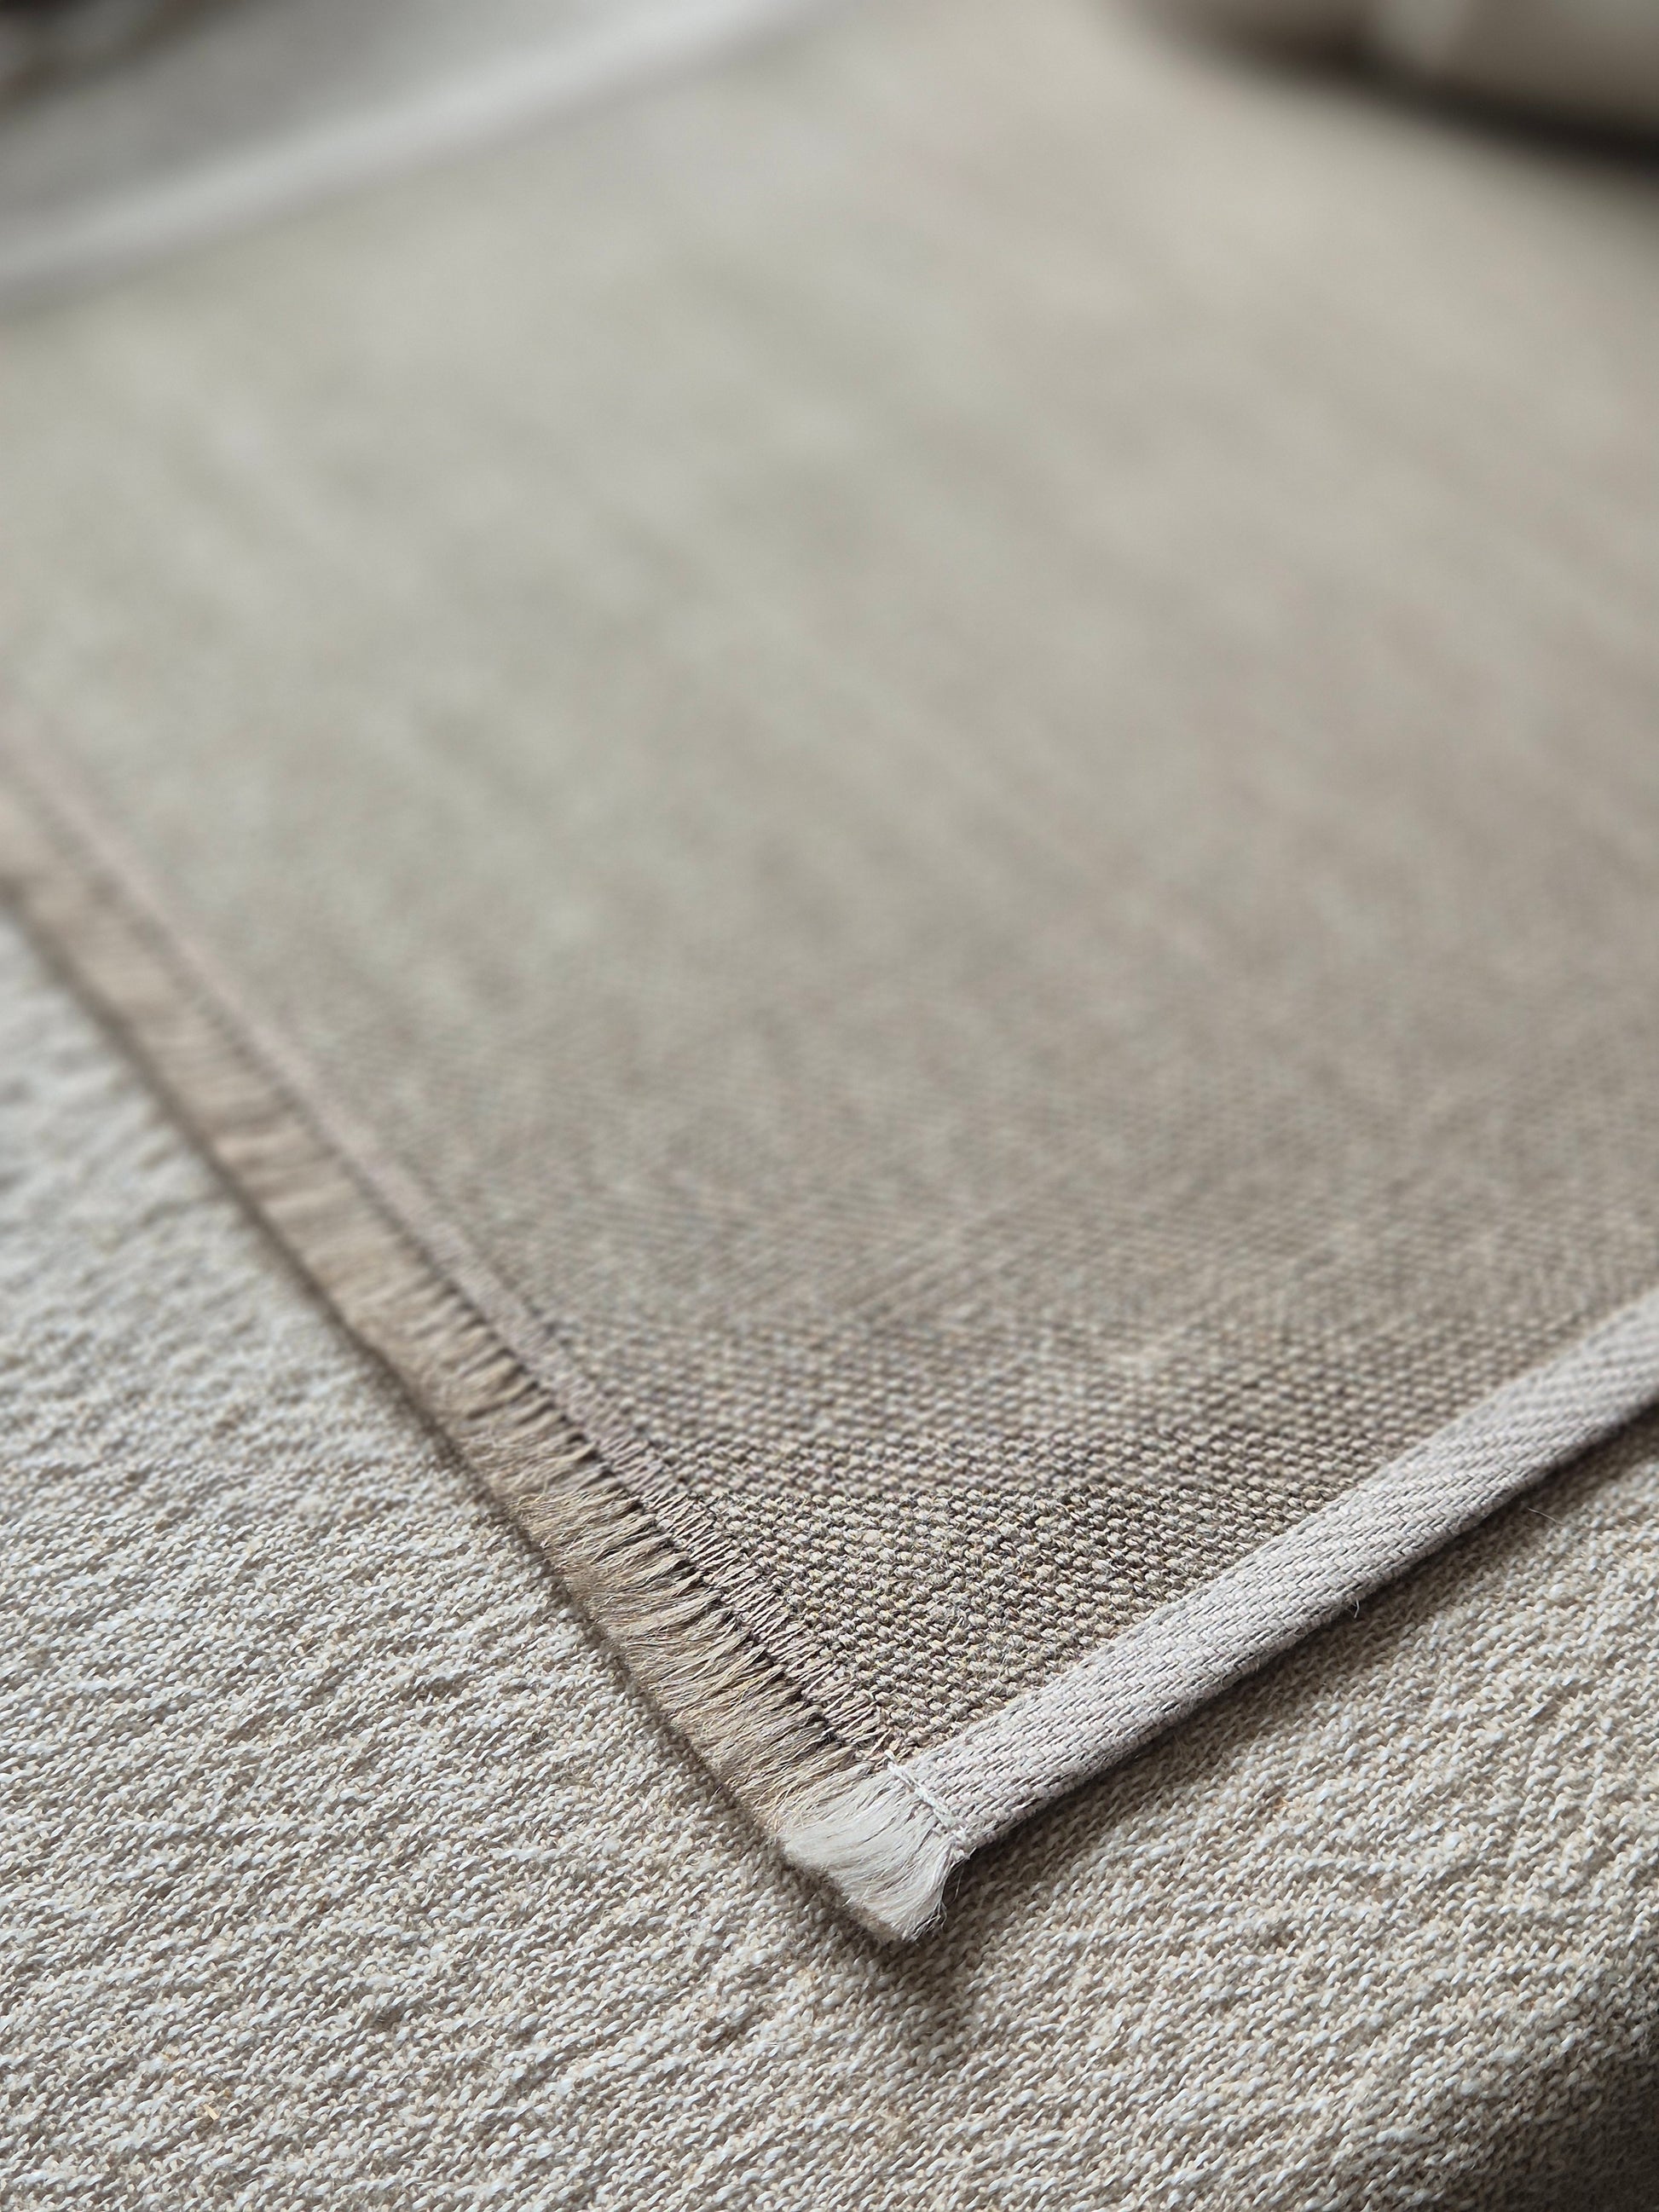 Natural stone linen placemat with hand brushed edges and contrasting oatmeal trim